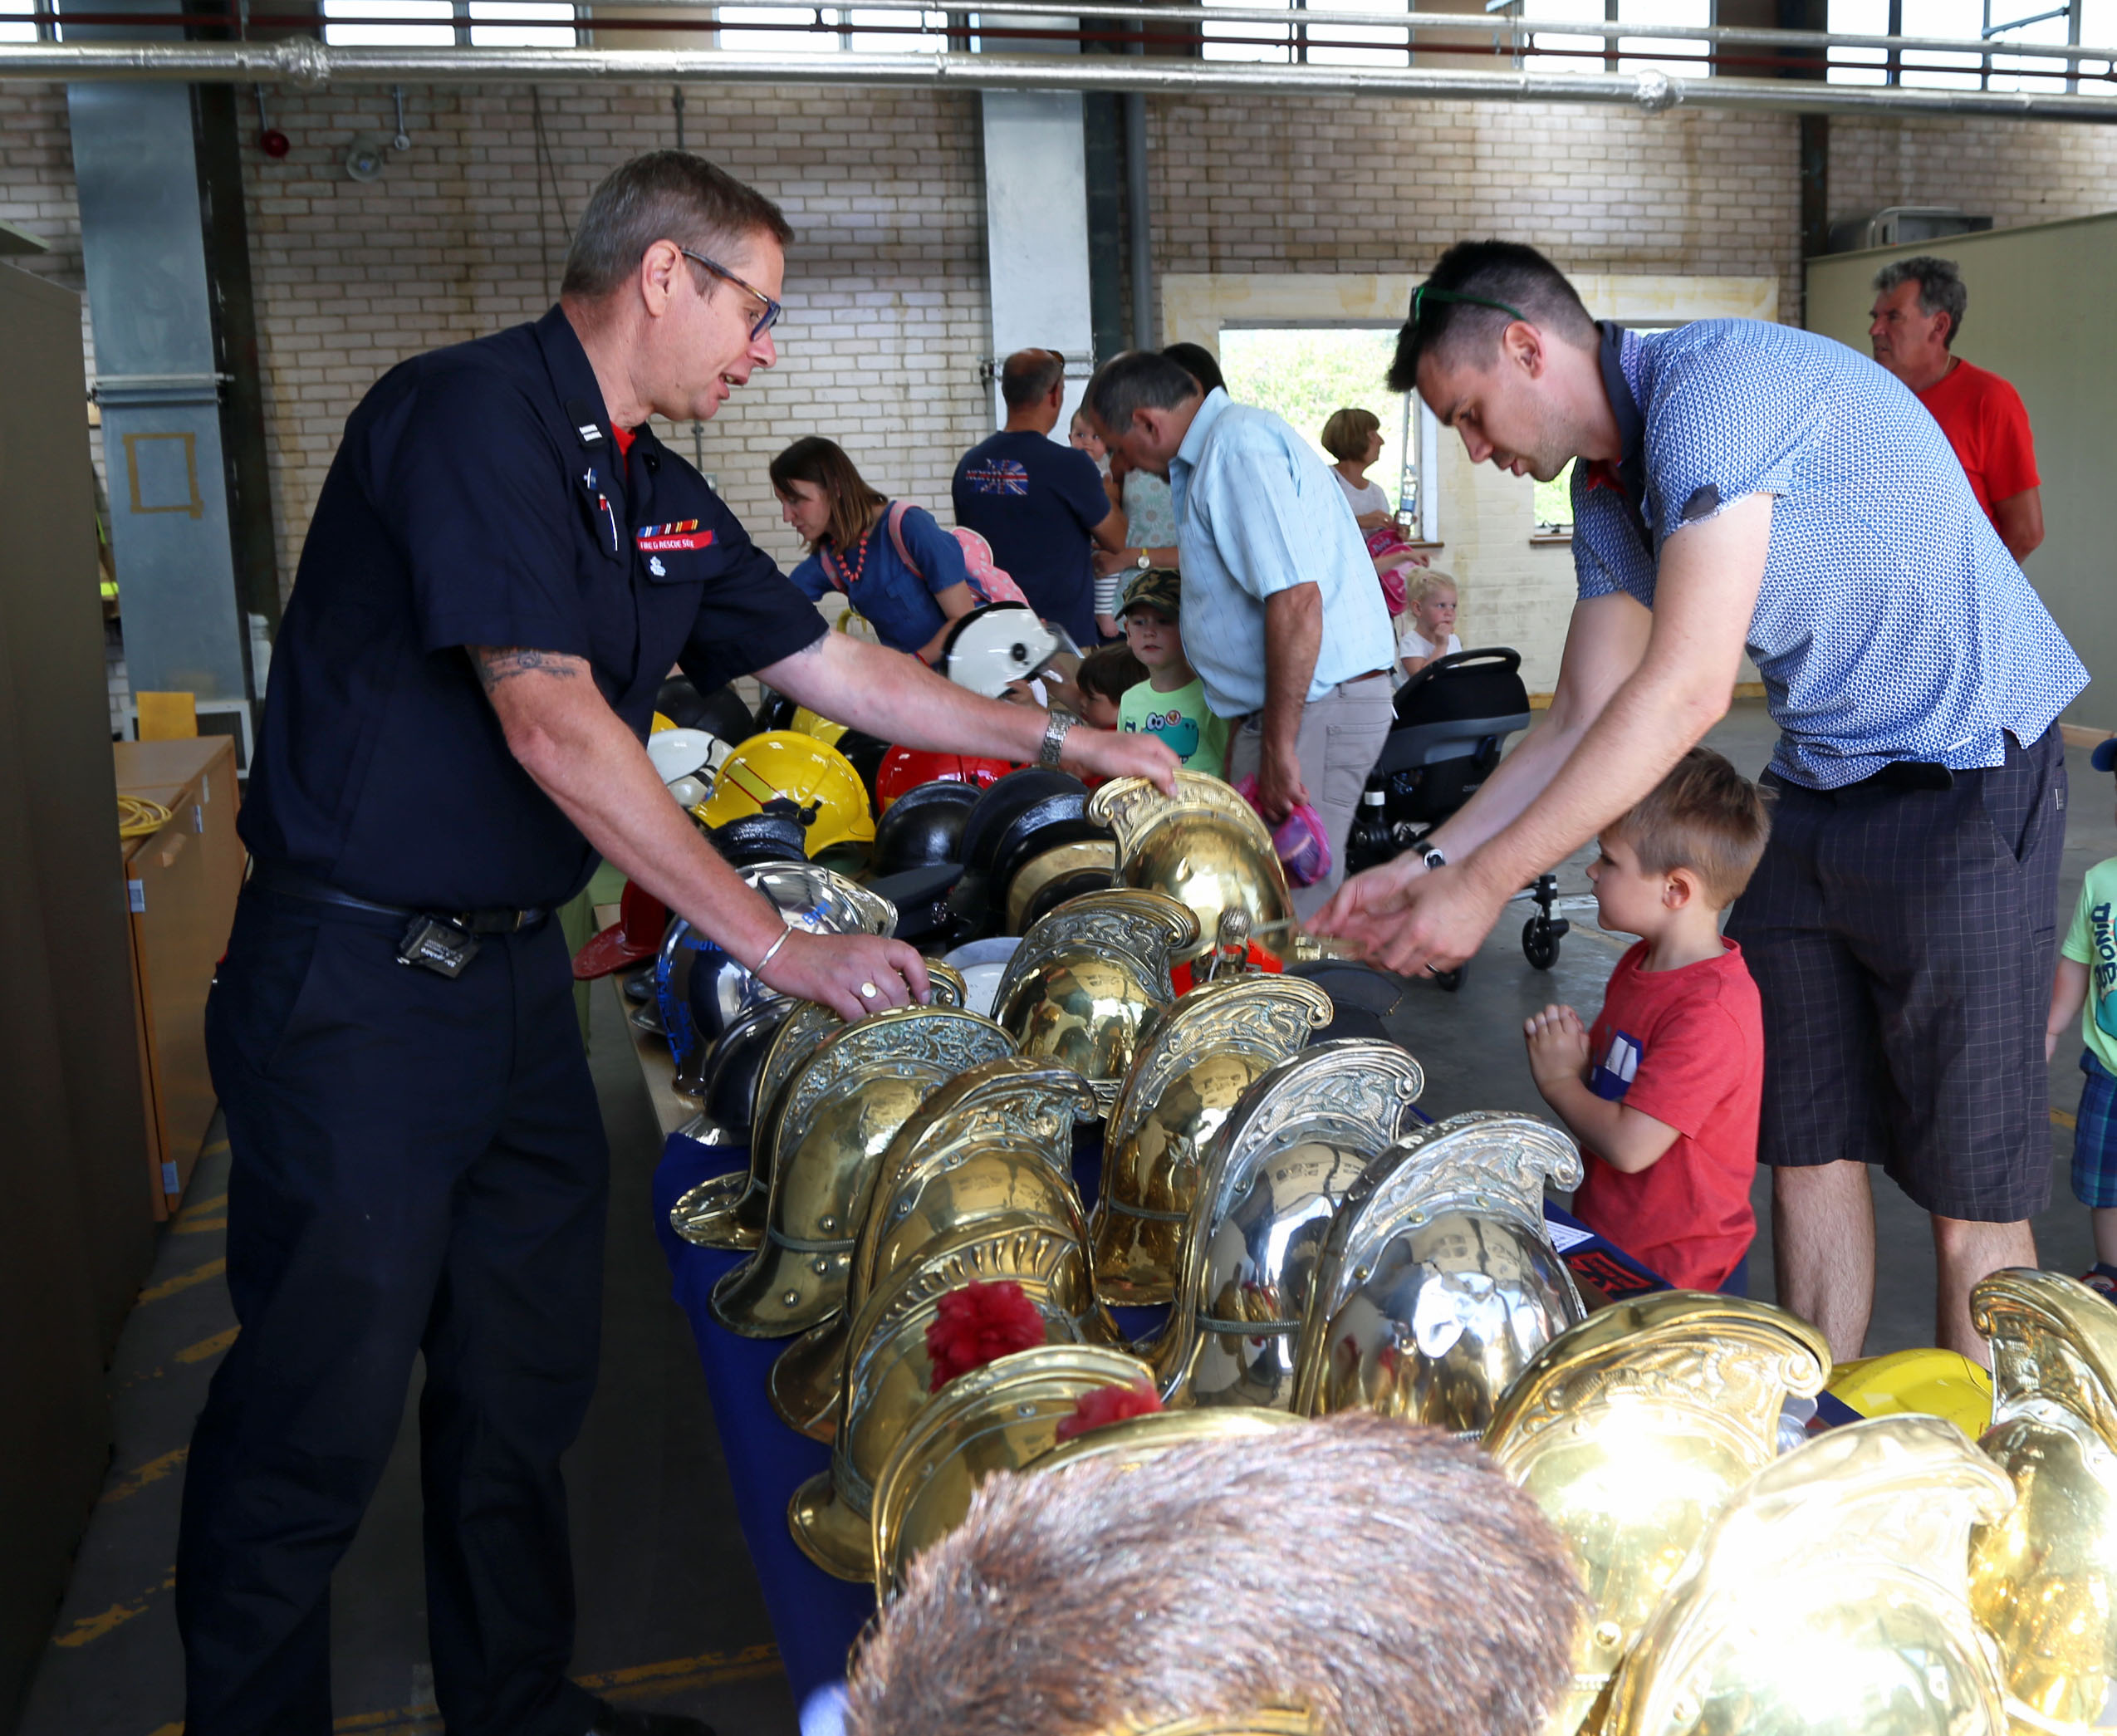 A selection of old firefighter helmets from through the ages were on display at Shrewsbury fire station open day